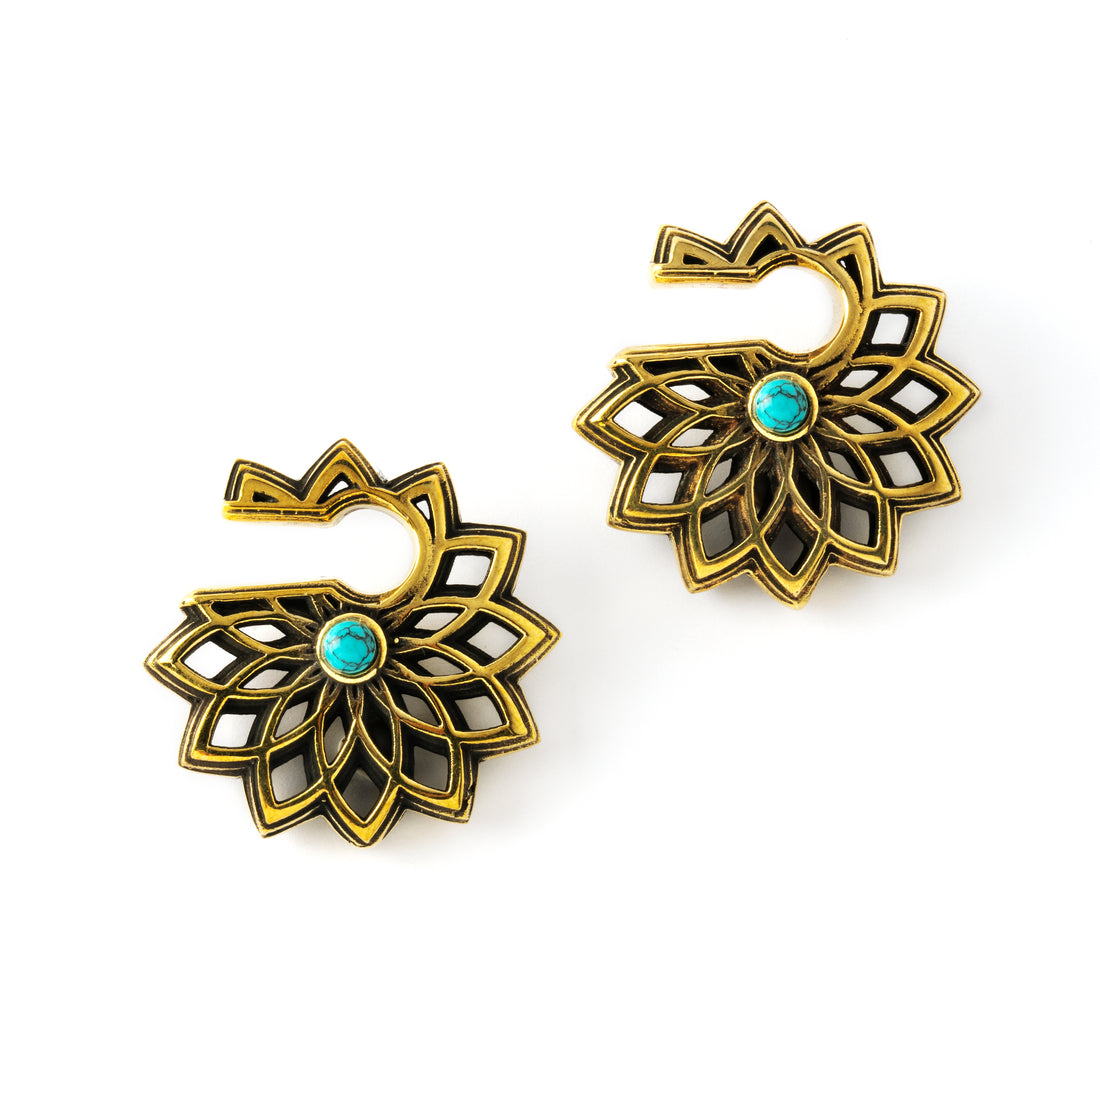 pair of antique gold colour geometric flower ear weights hangers with turquoise frontal view